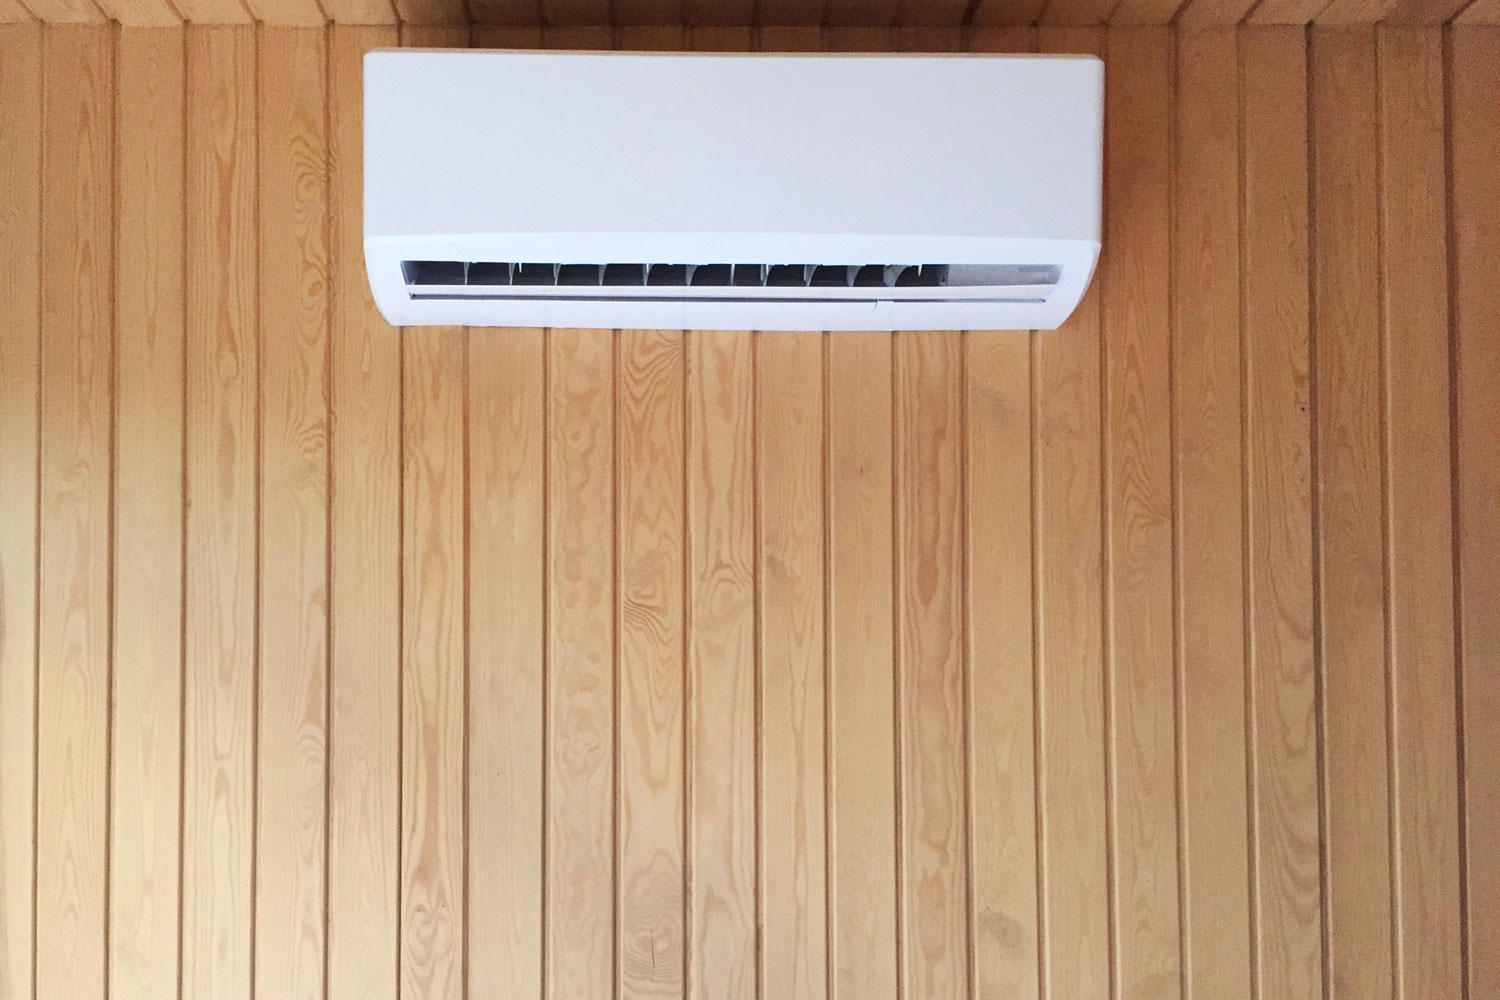 A min split air conditioning unit mounted on the wooden paneling wall